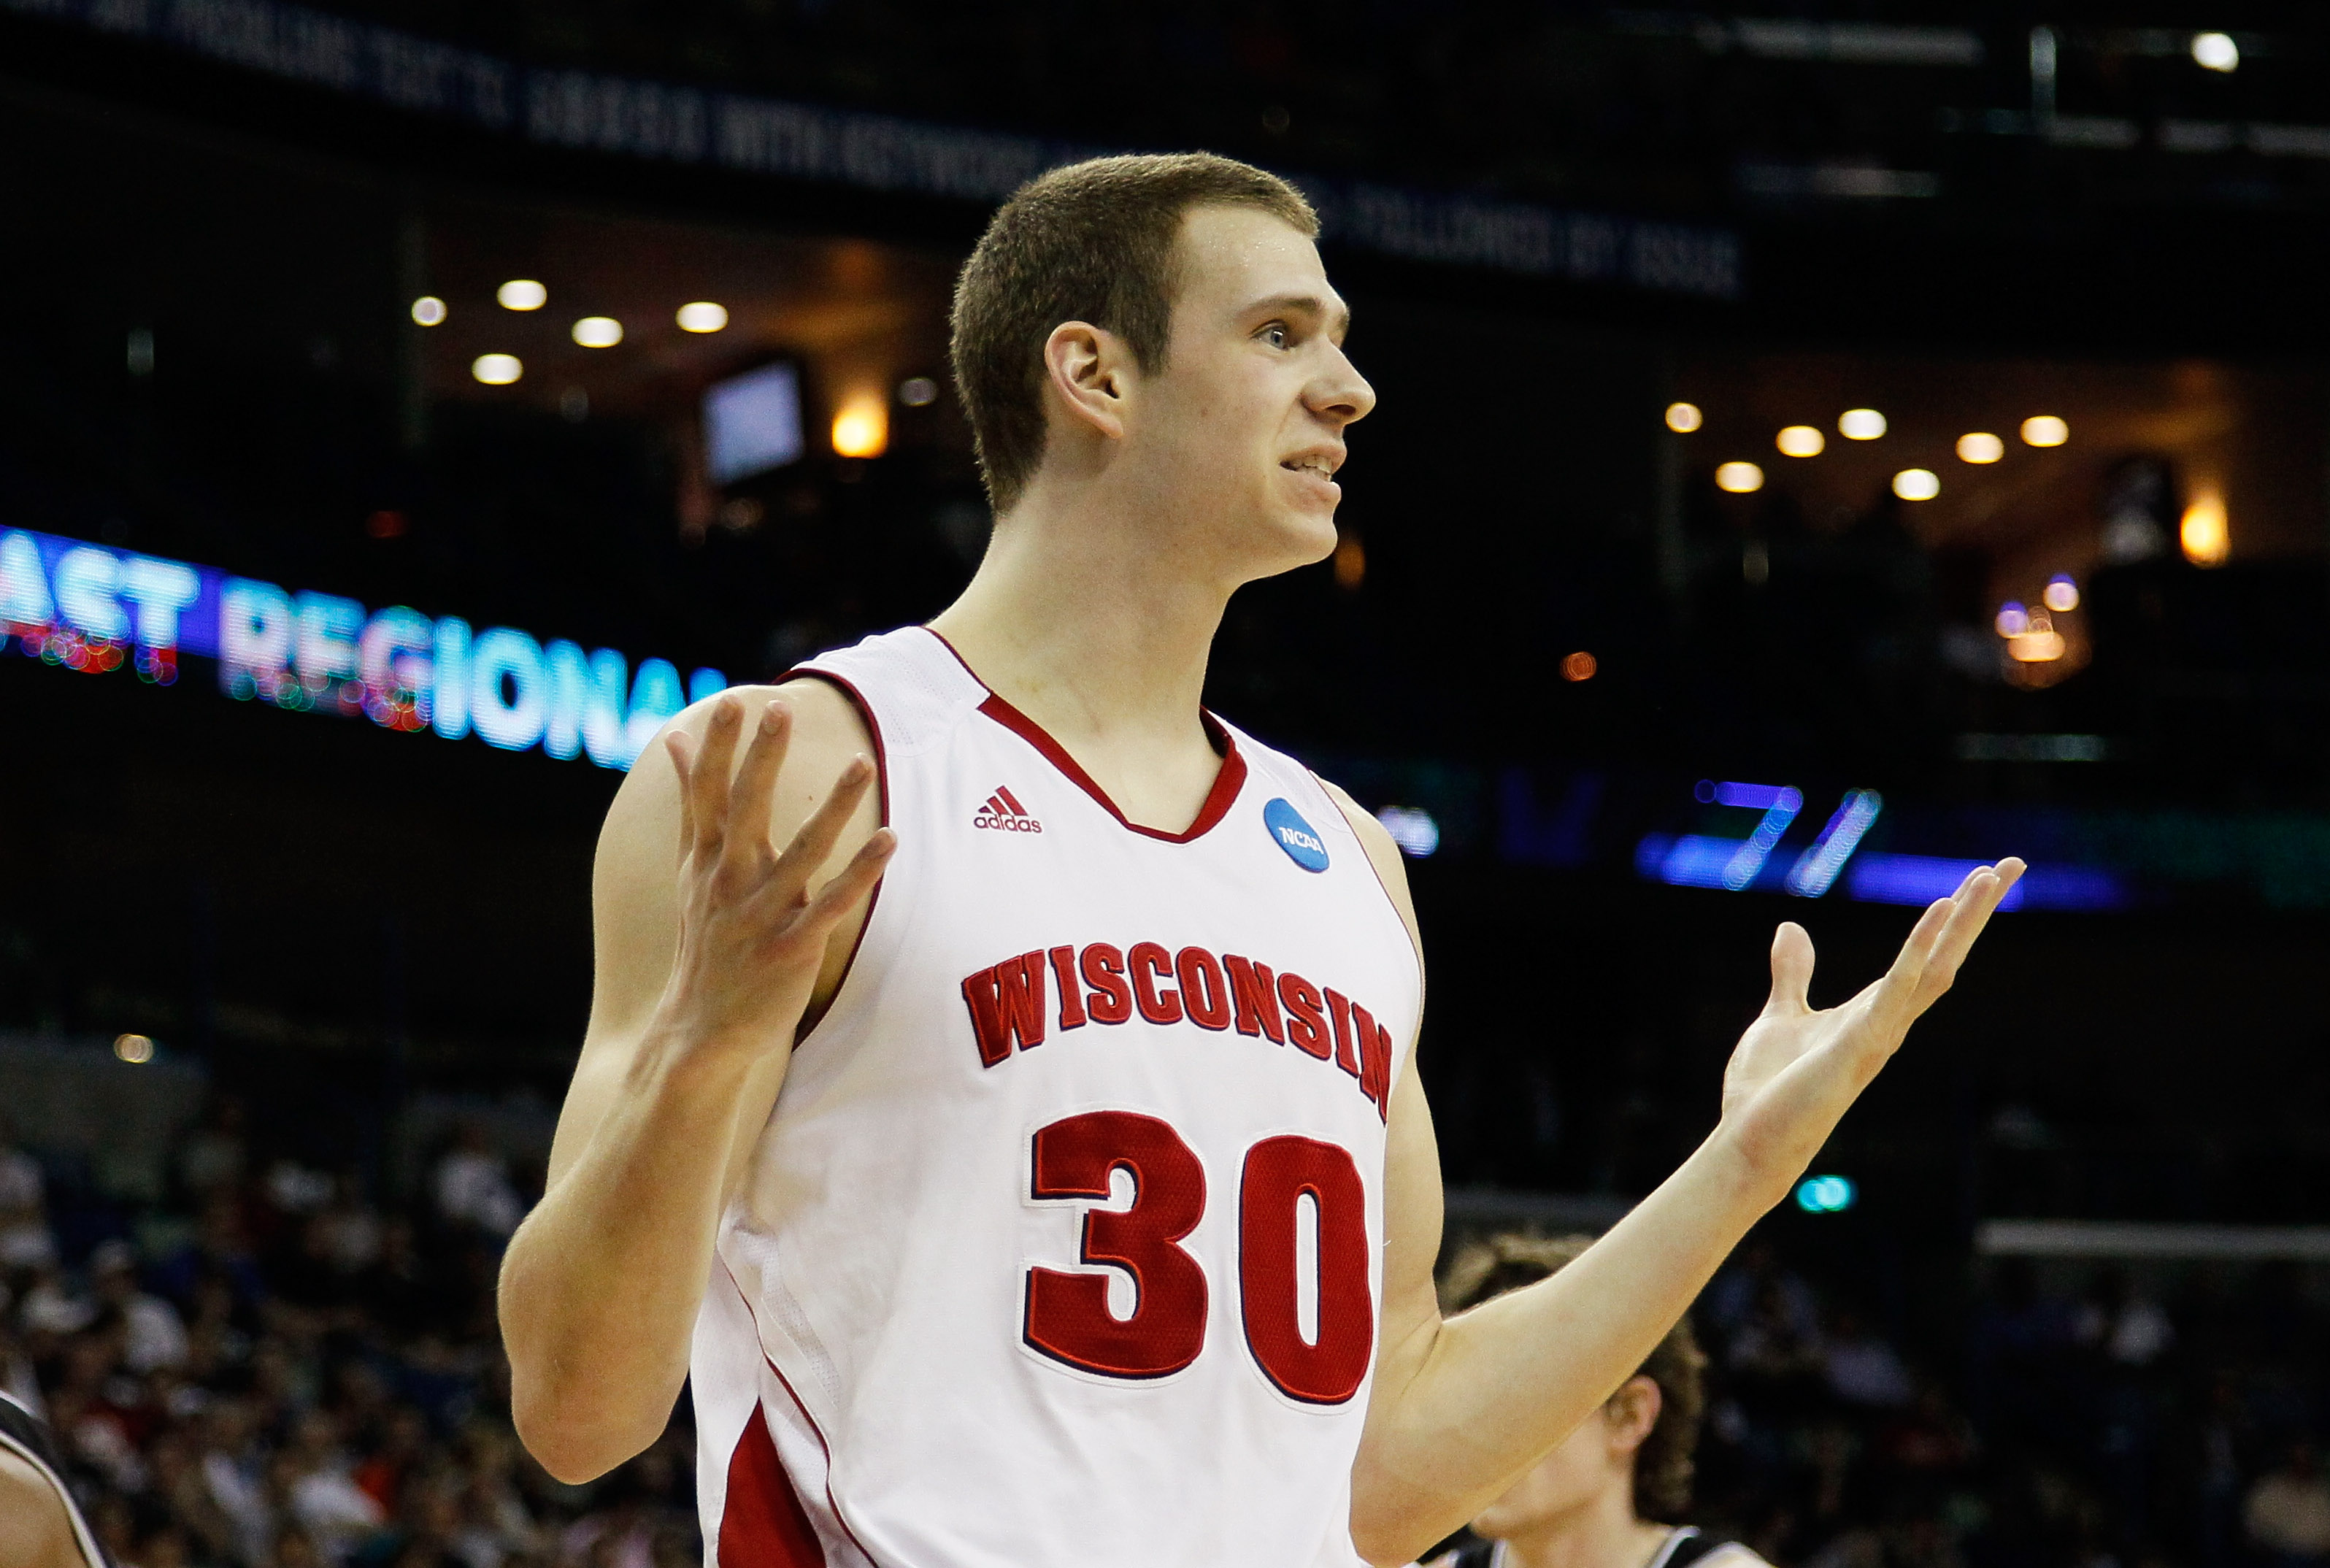 NEW ORLEANS, LA - MARCH 24:  Jon Leuer #30 of the Wisconsin Badgers reacts after being called for a foul against the Butler Bulldogs during the Southeast regional of the 2011 NCAA men's basketball tournament at New Orleans Arena on March 24, 2011 in New O